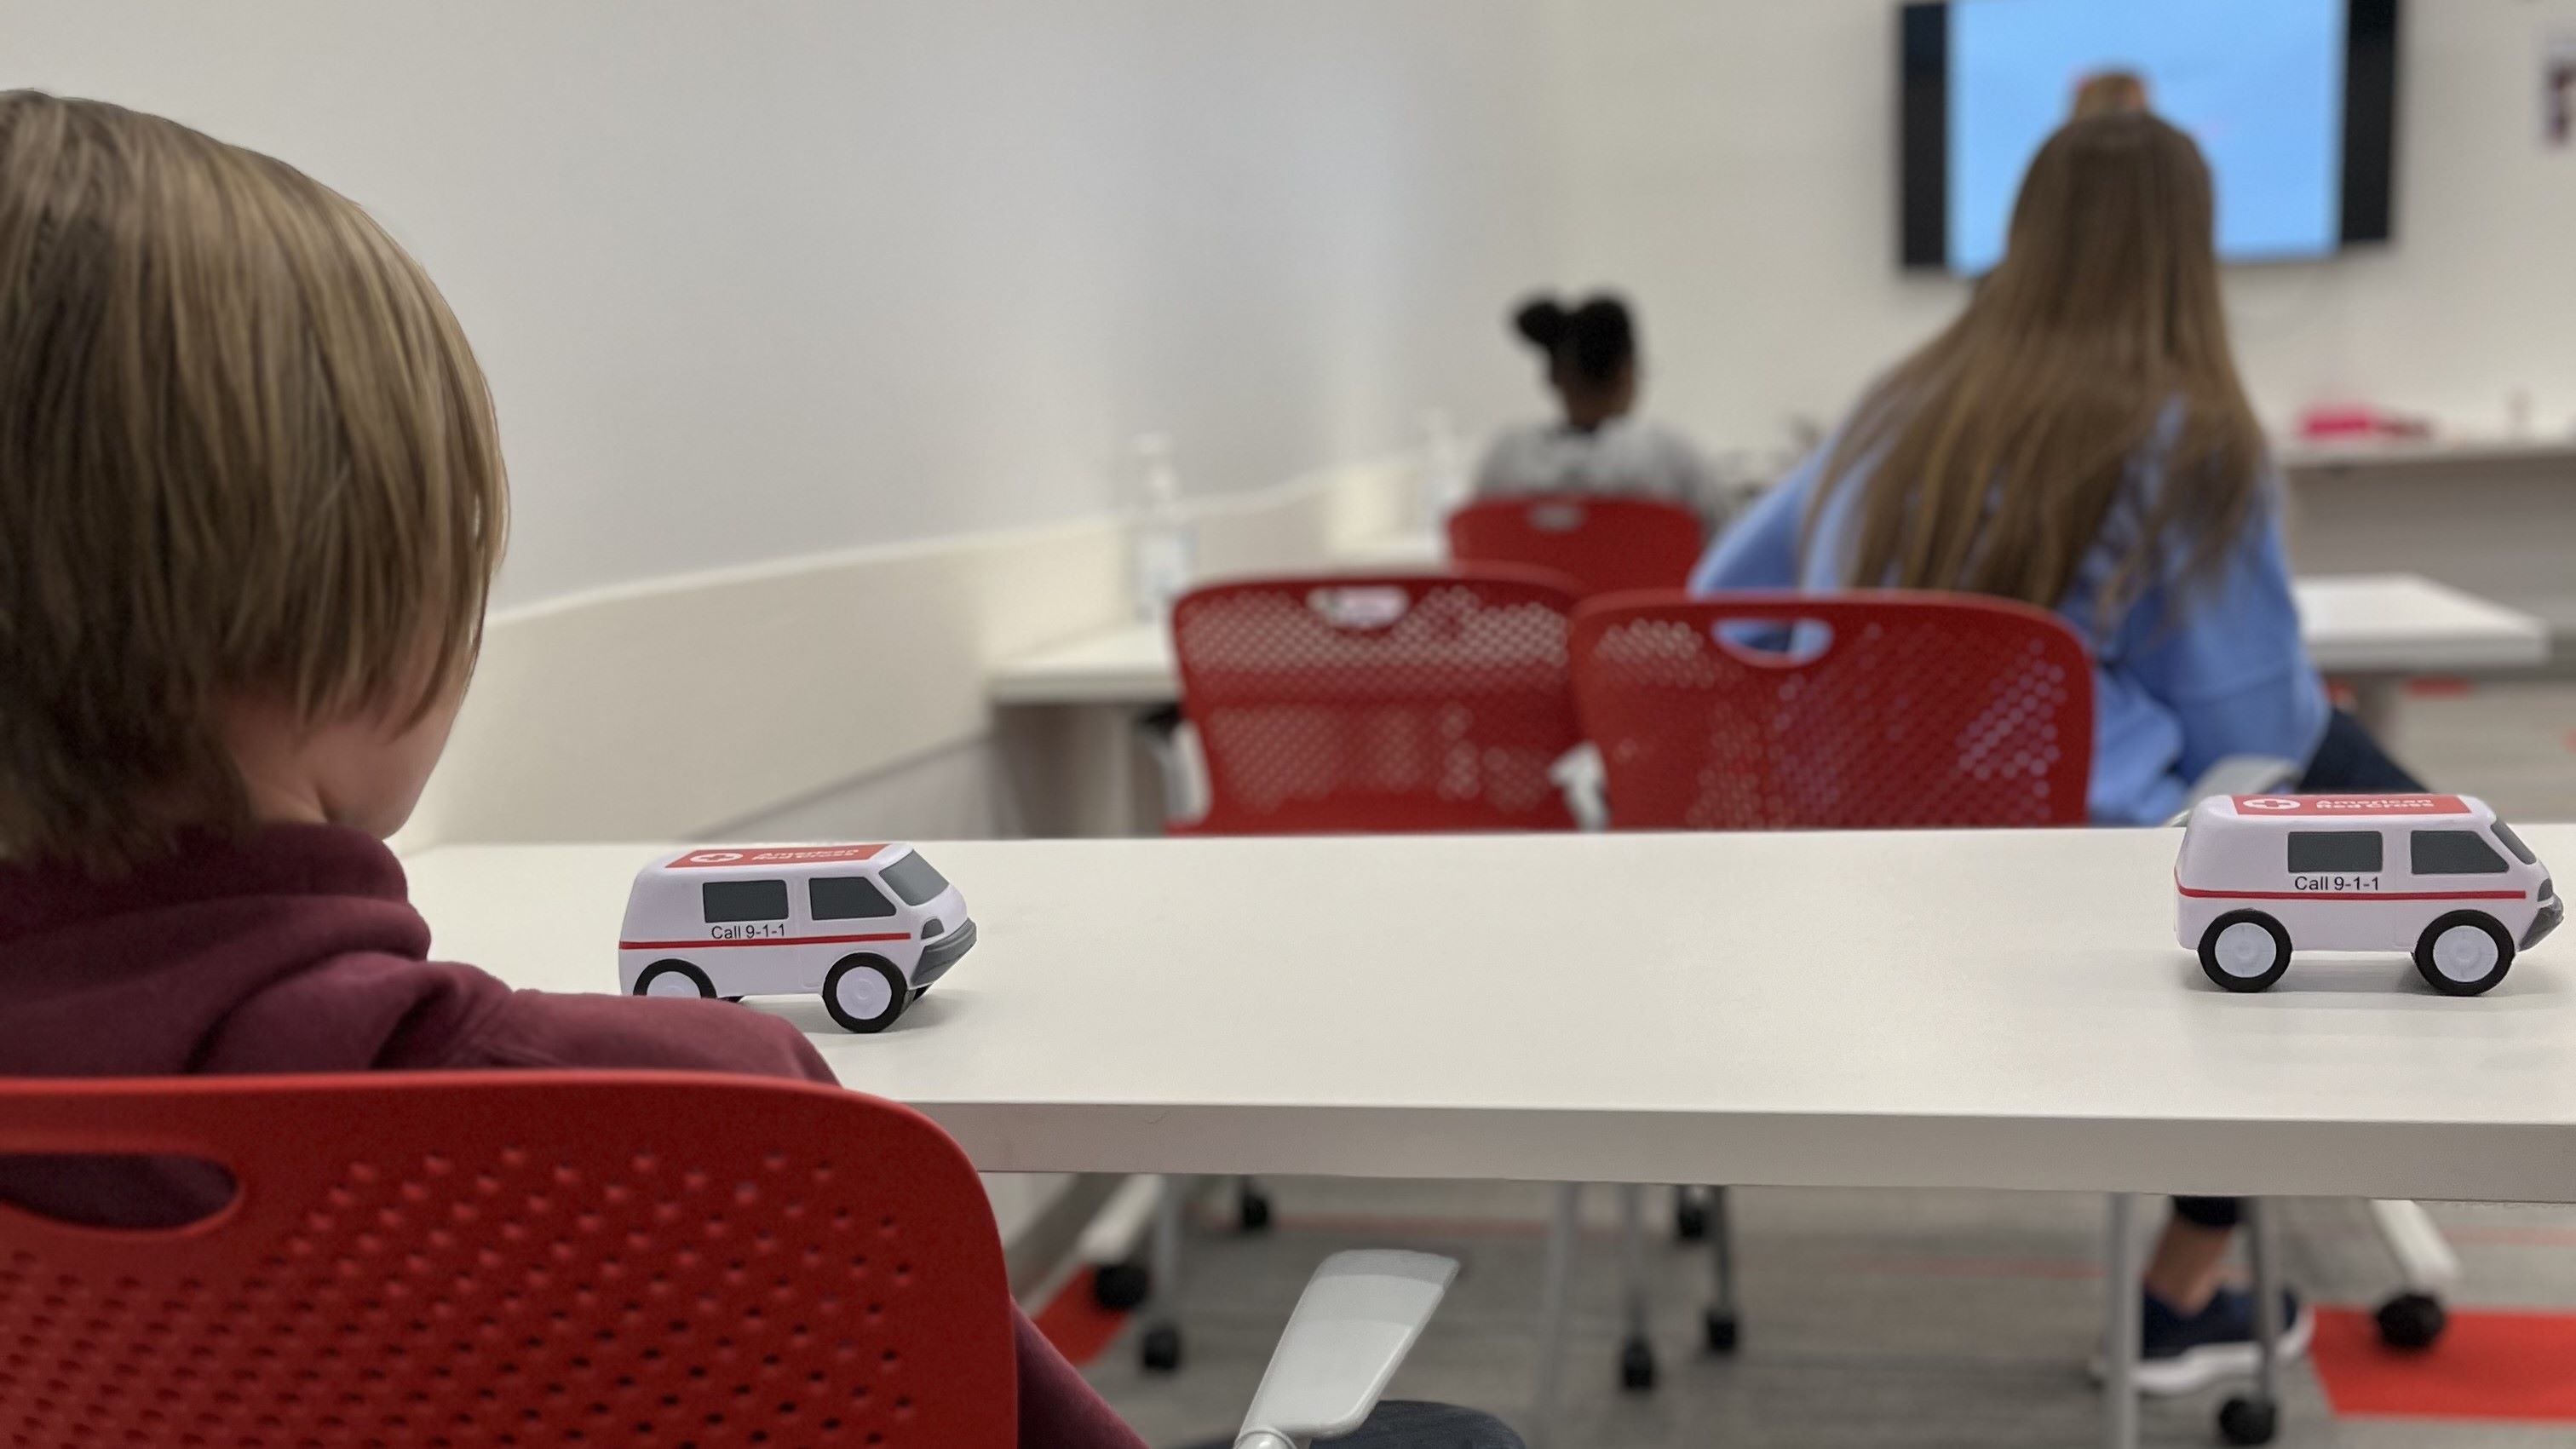 male student sitting at table with toy truck